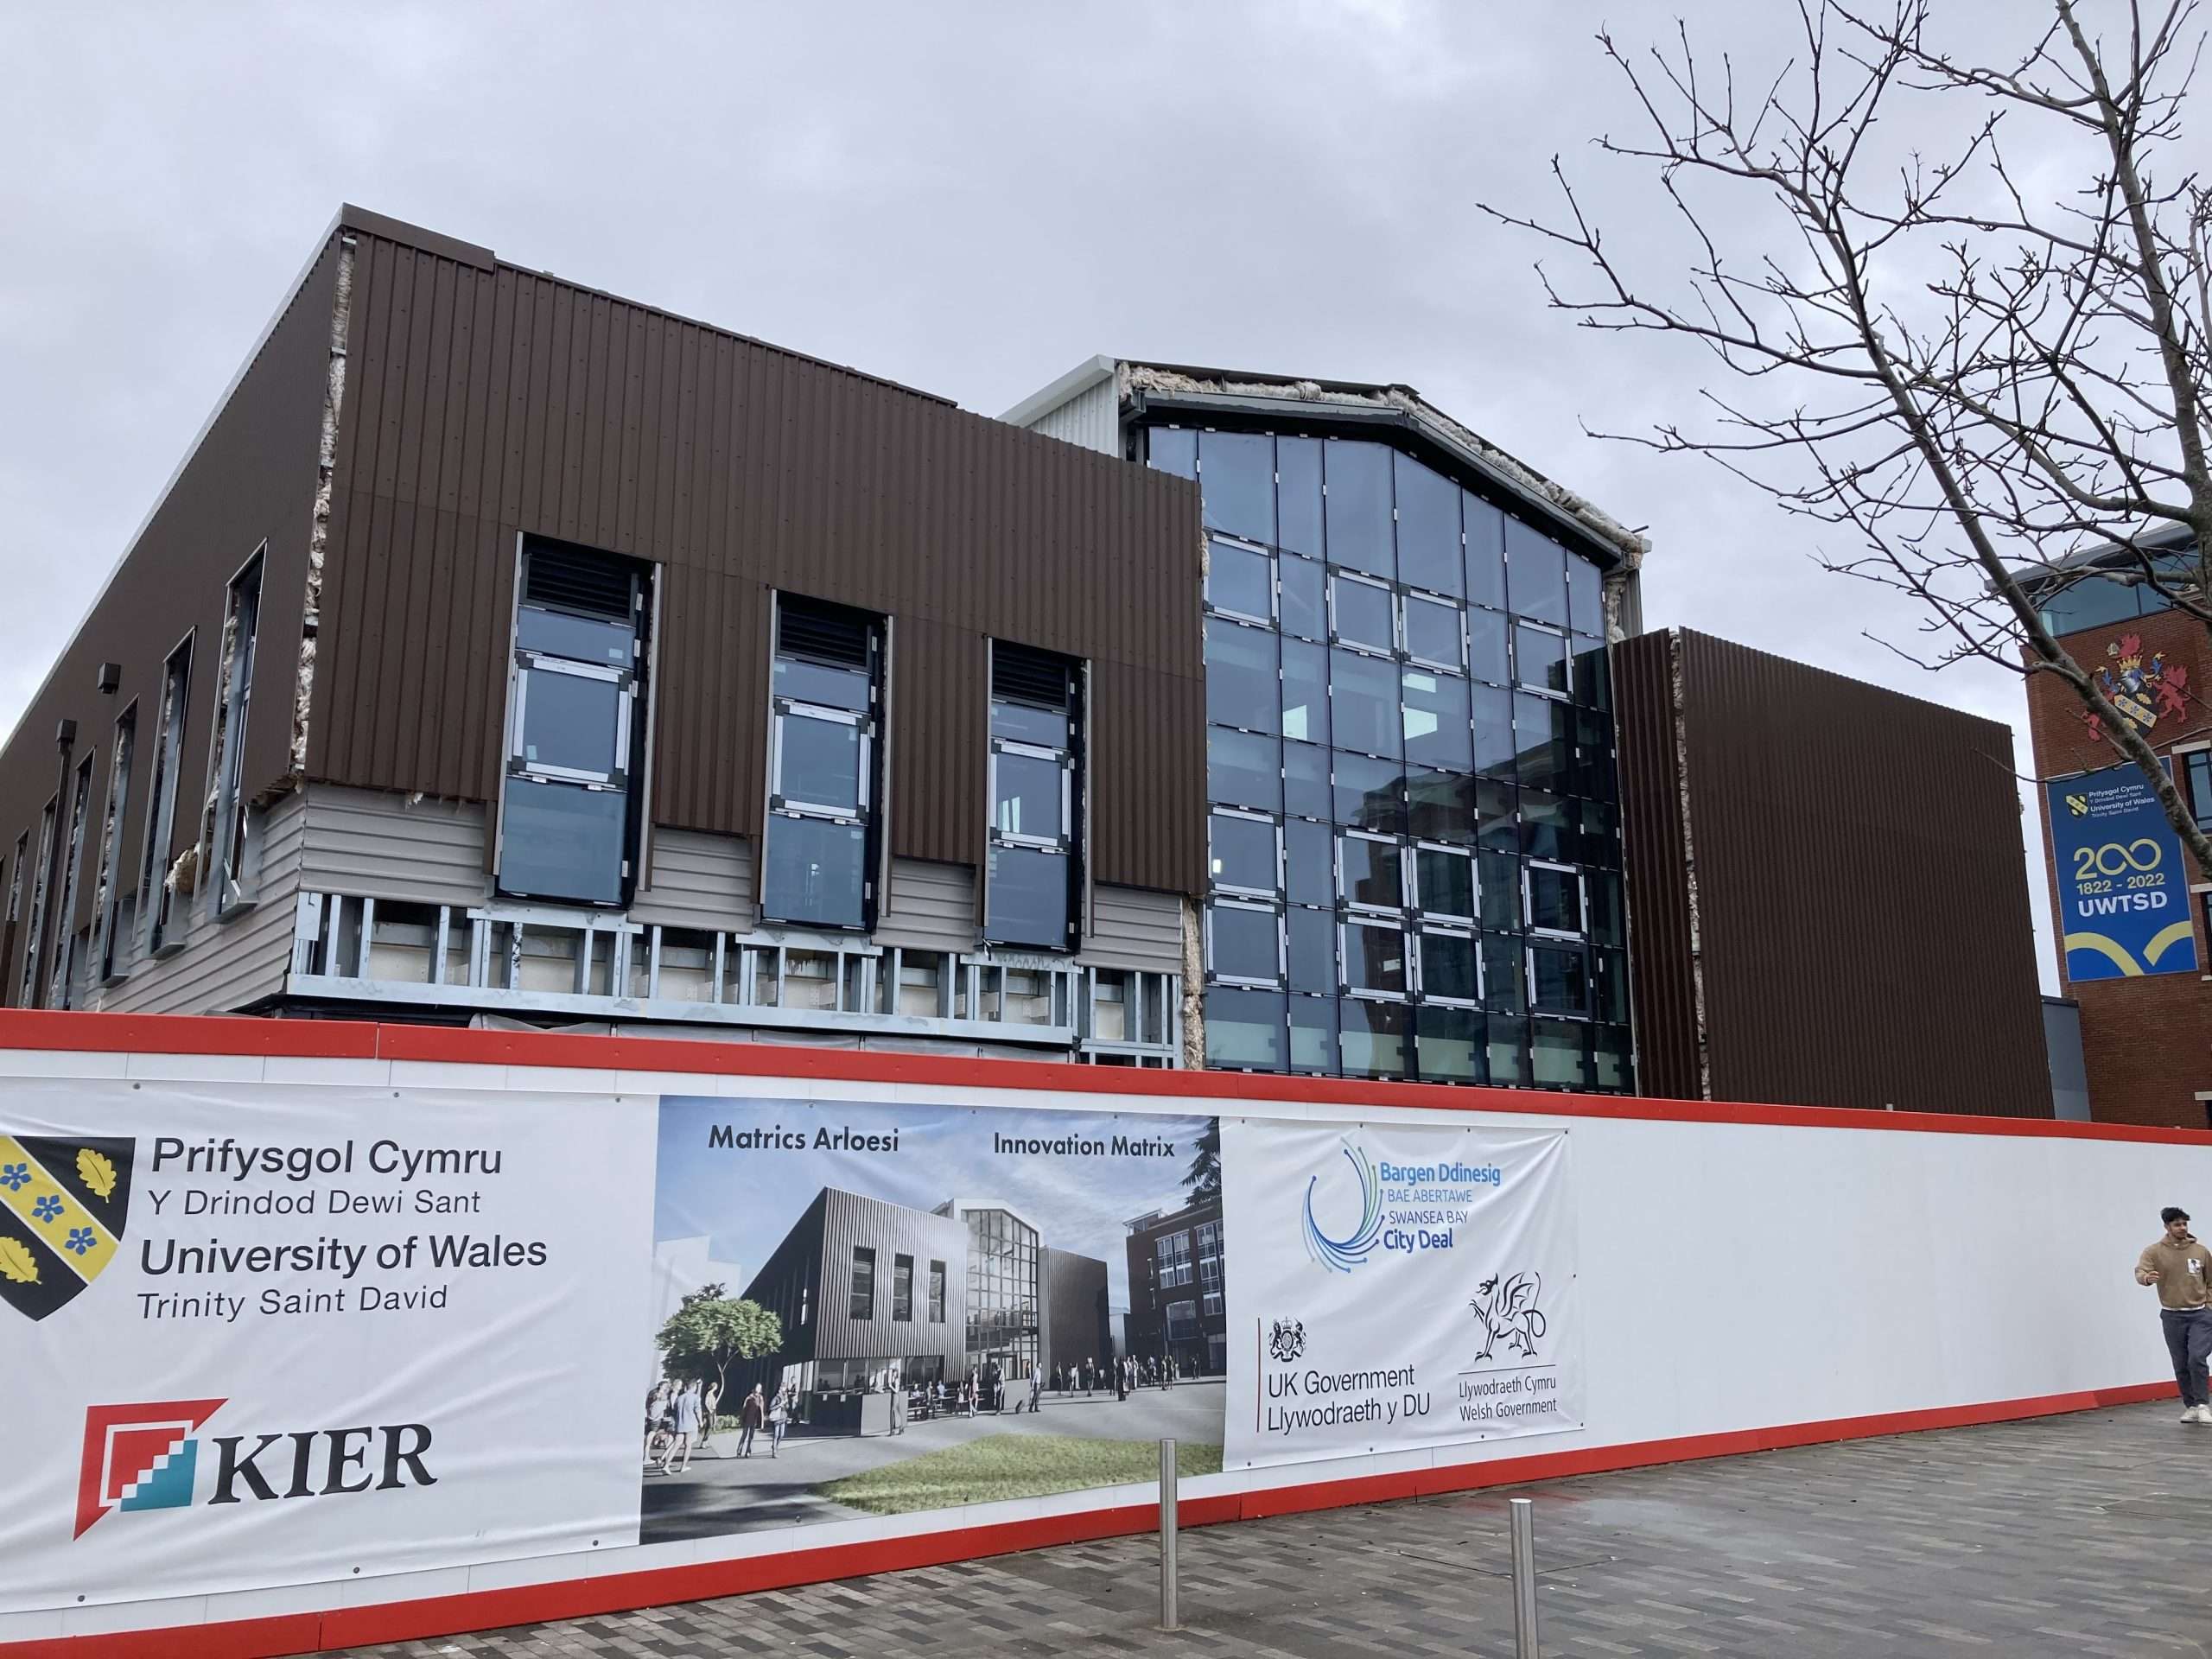 Completion of new office building in Swansea expected by June